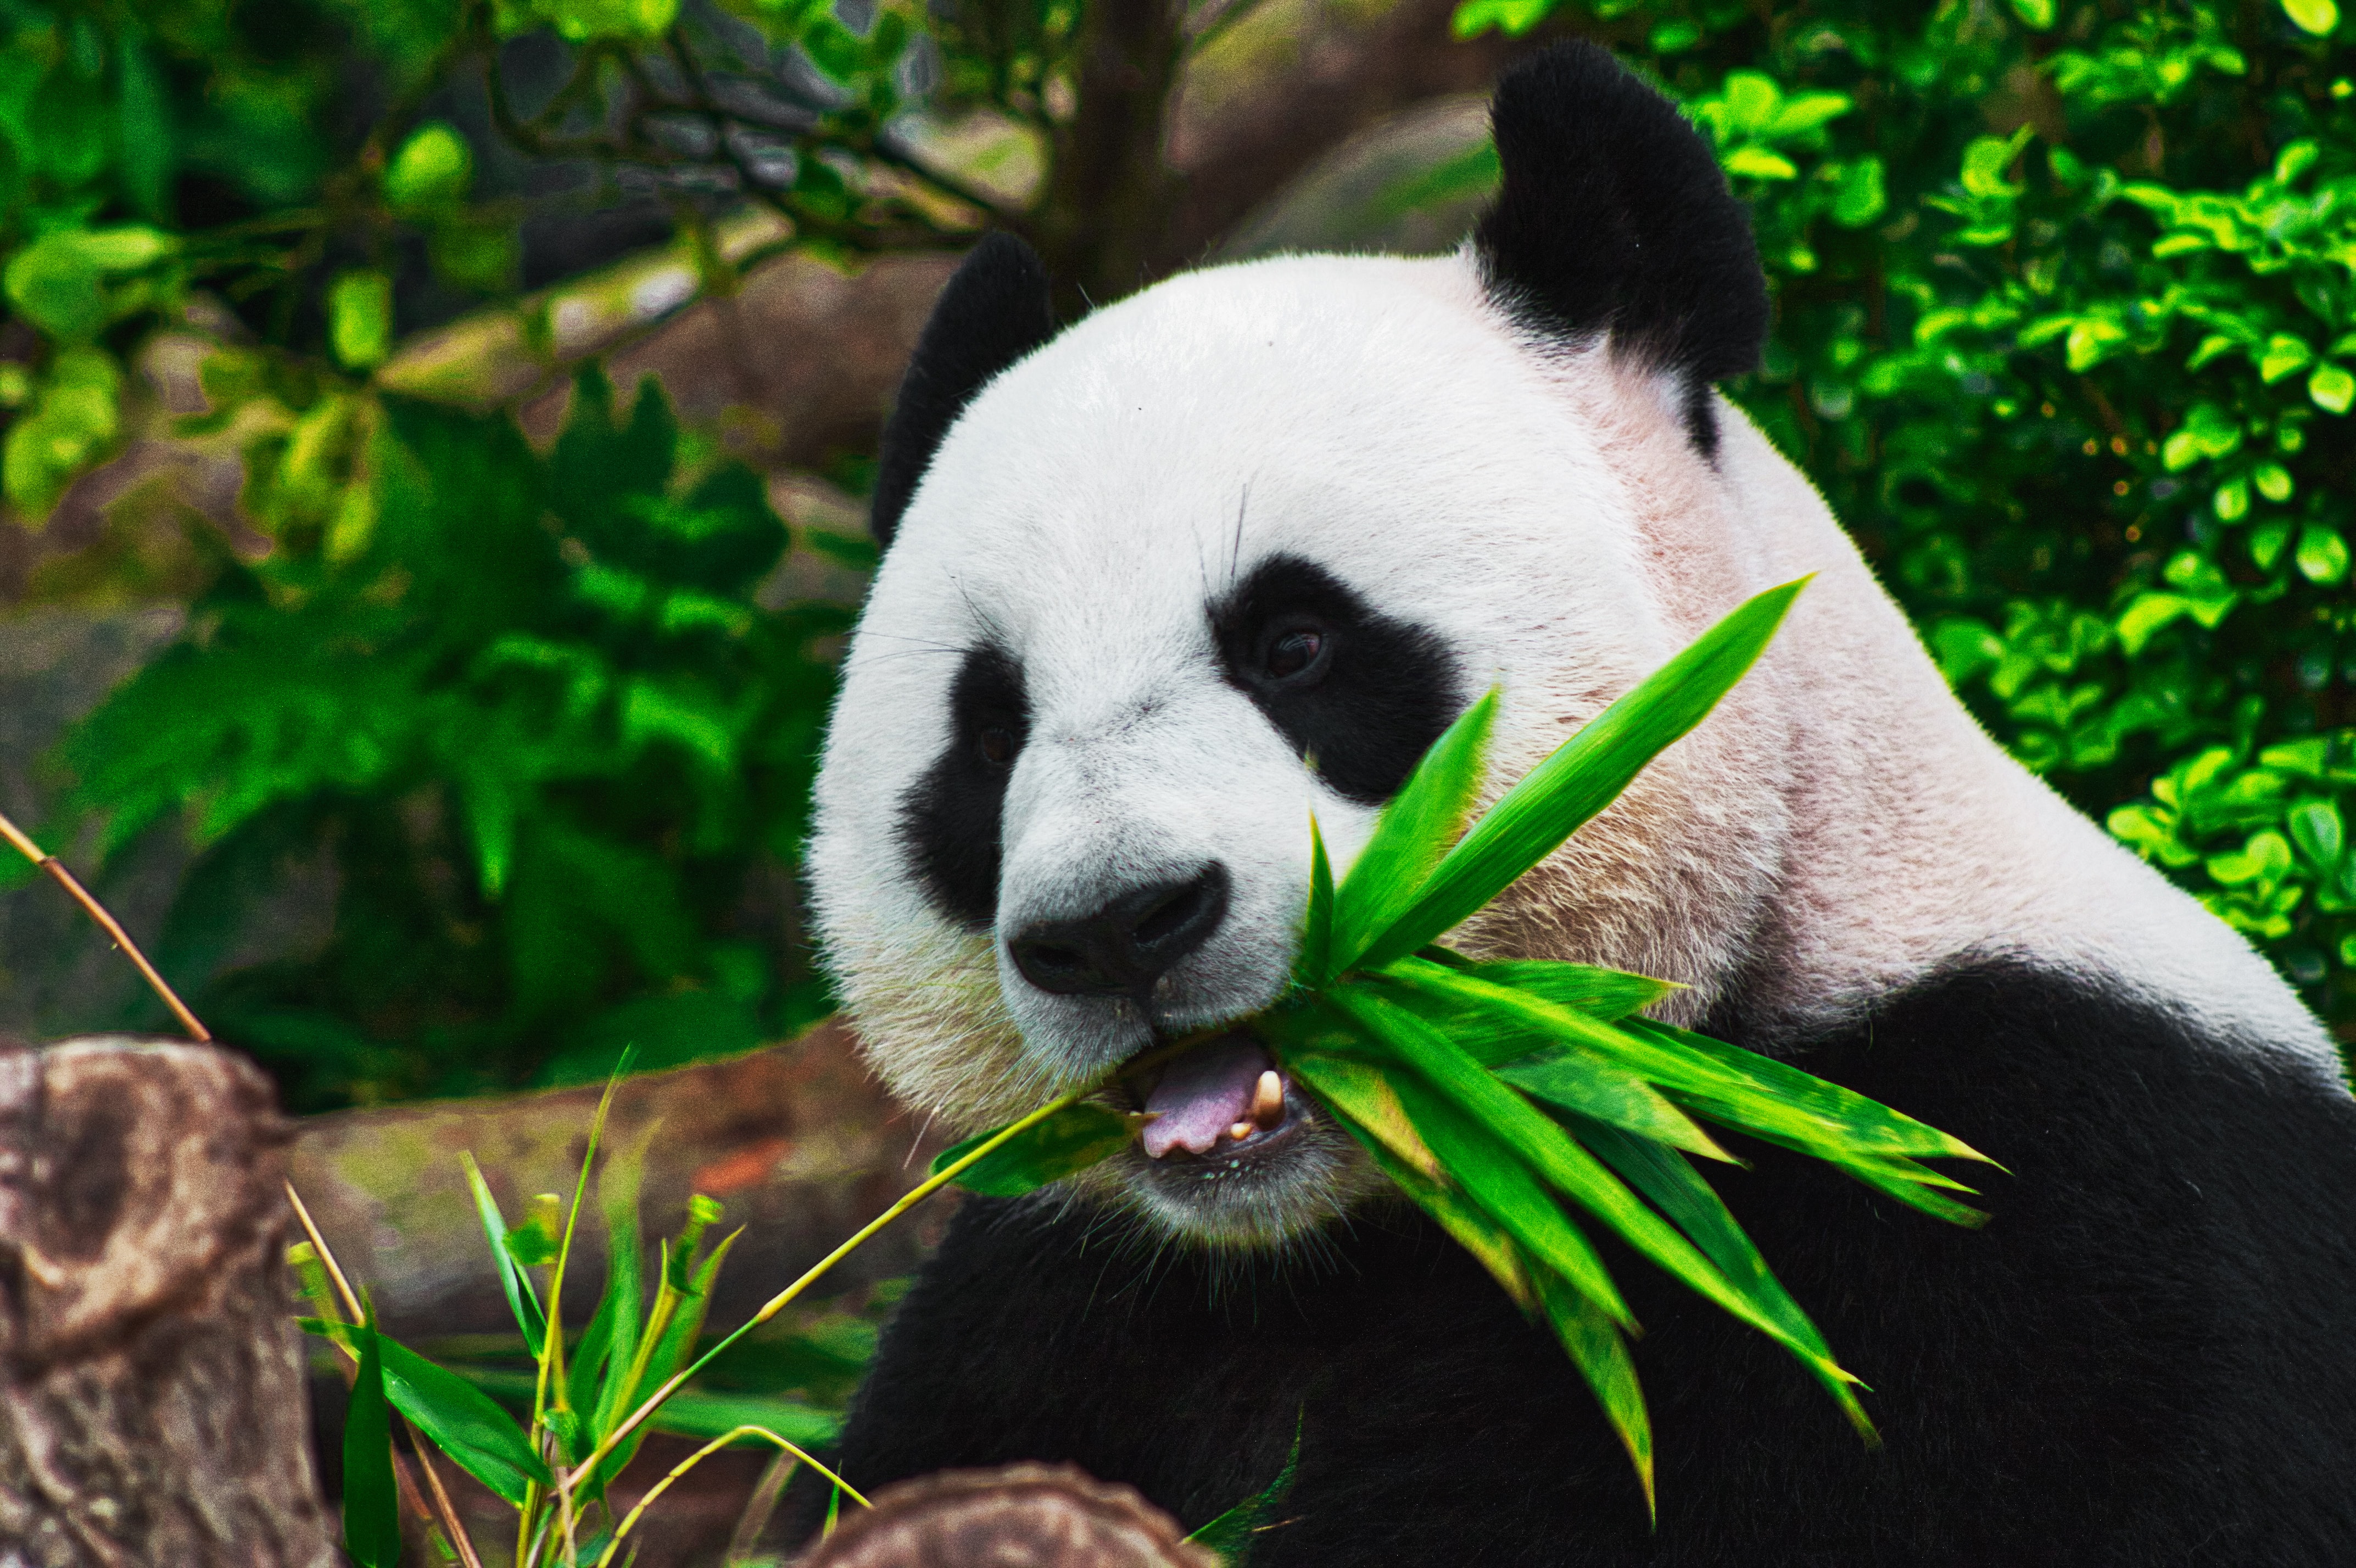 I love Pandas, or how to generate profile reports from data - Cloud1